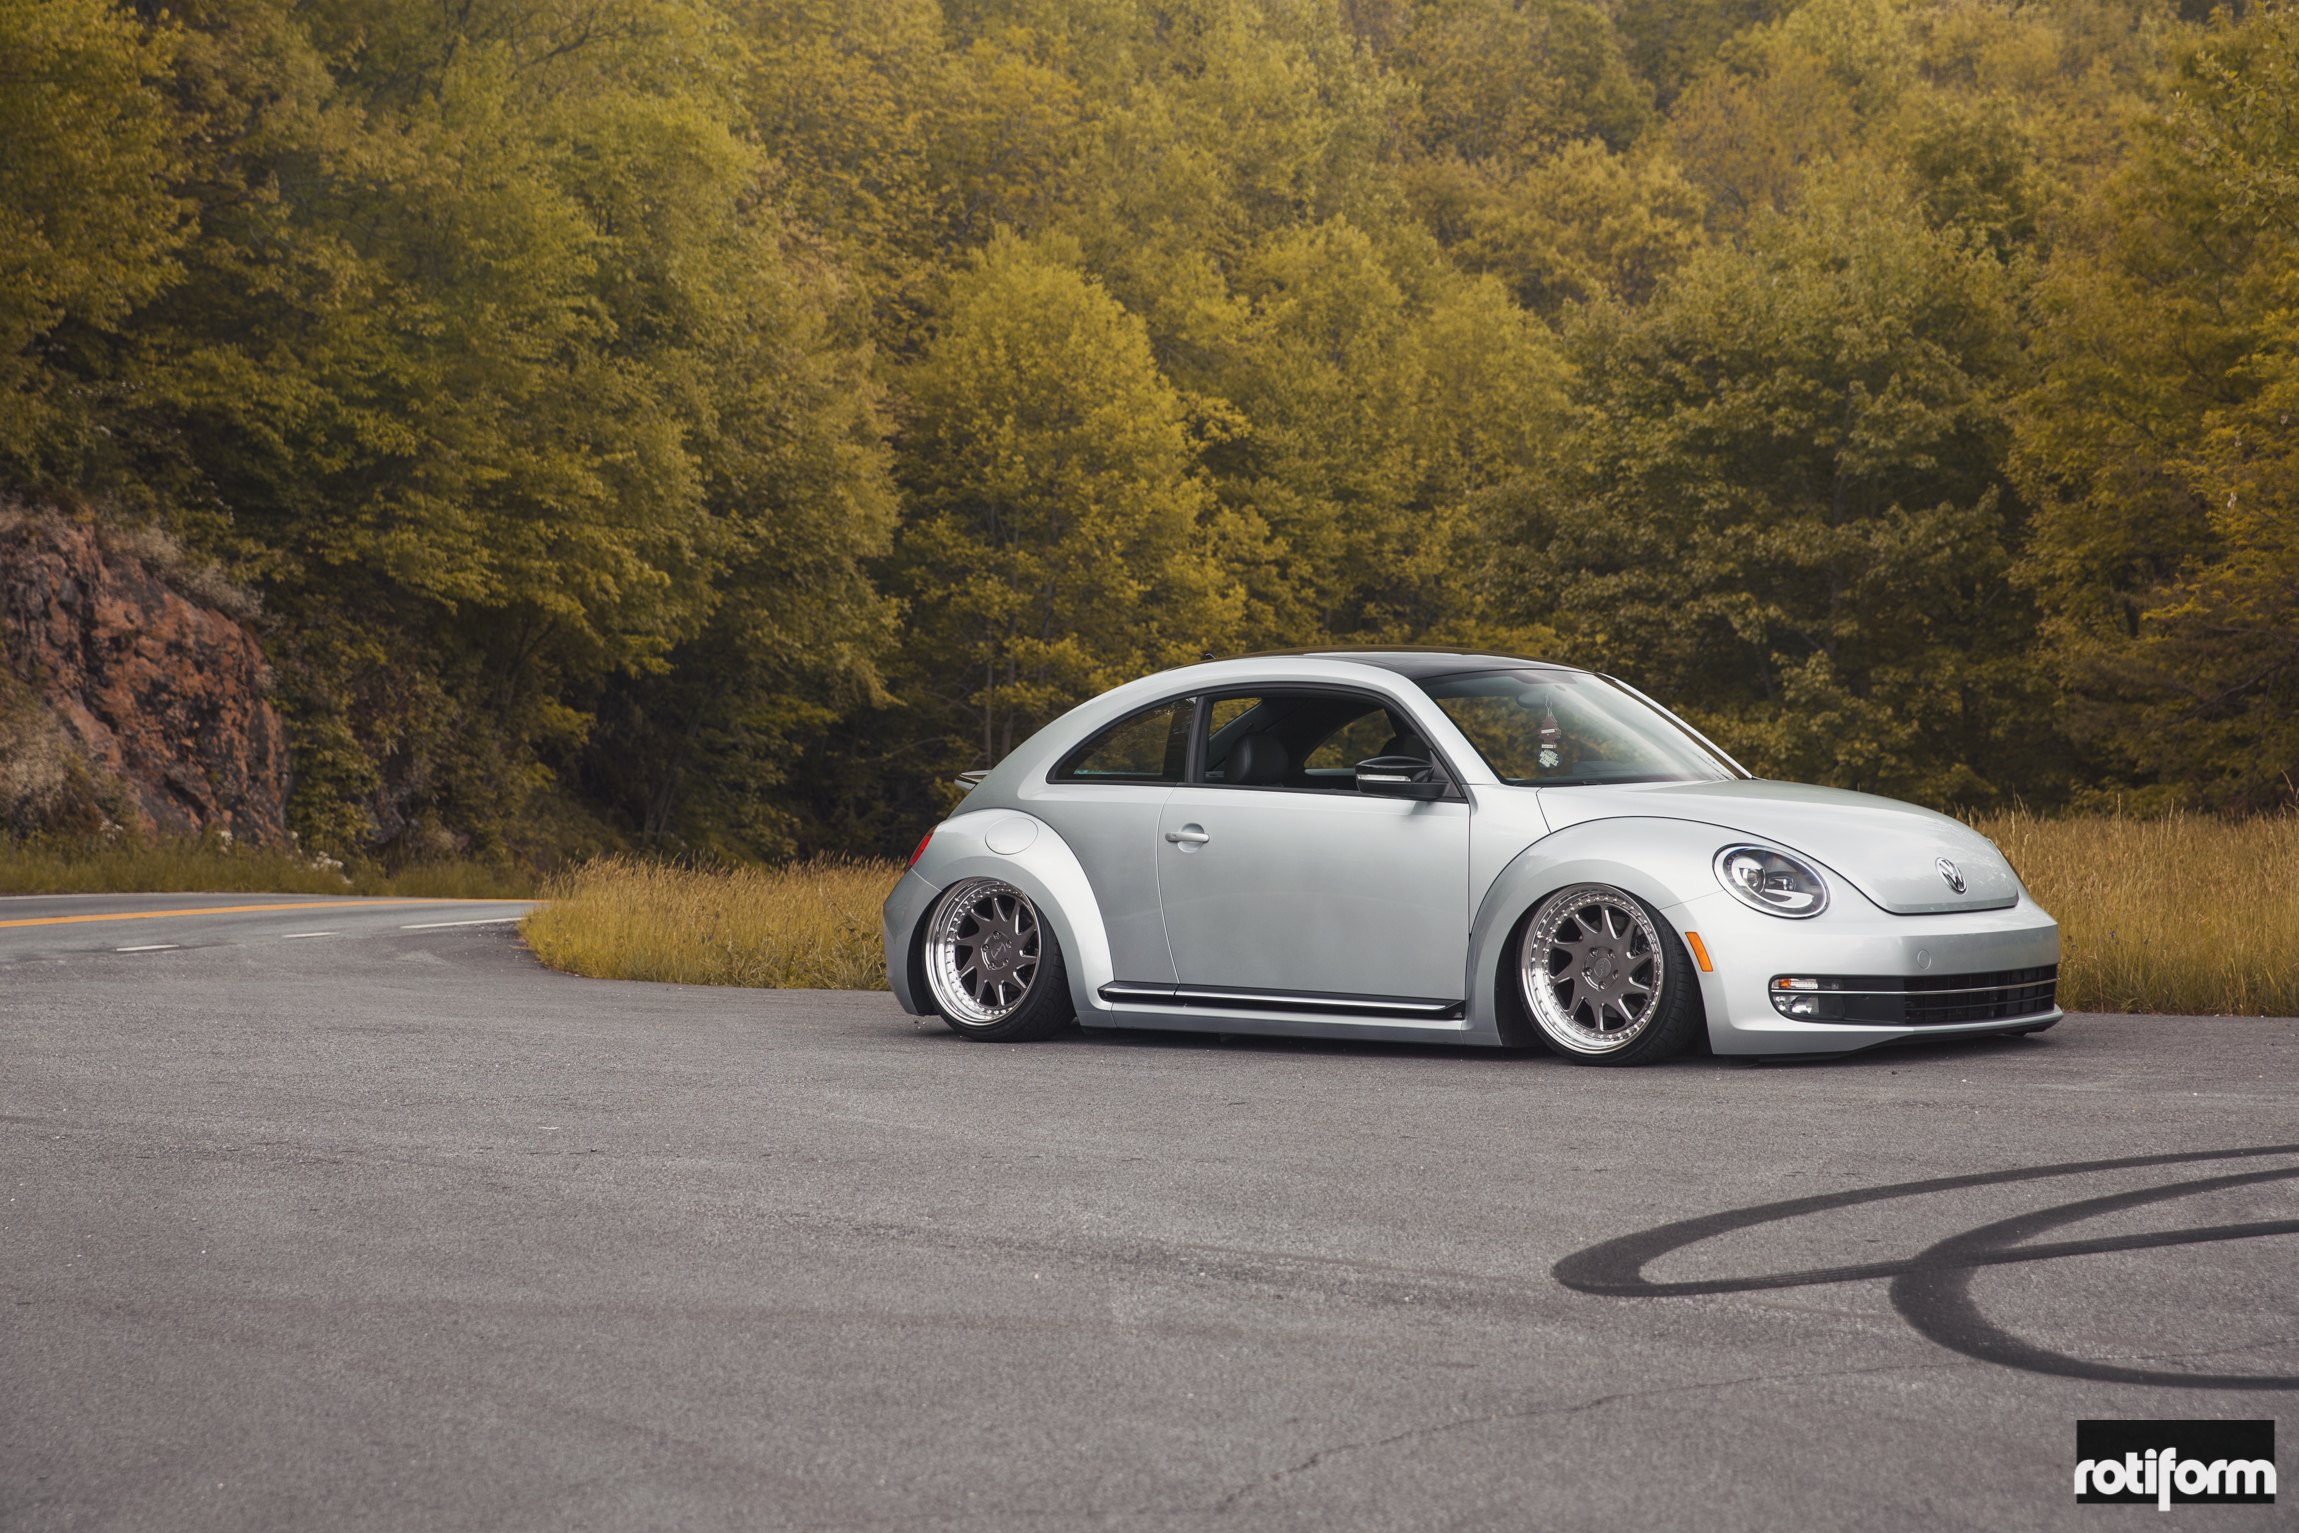 Silver VW Beetle with Aftermarket Bodyside Moldings - Photo by Rotiform